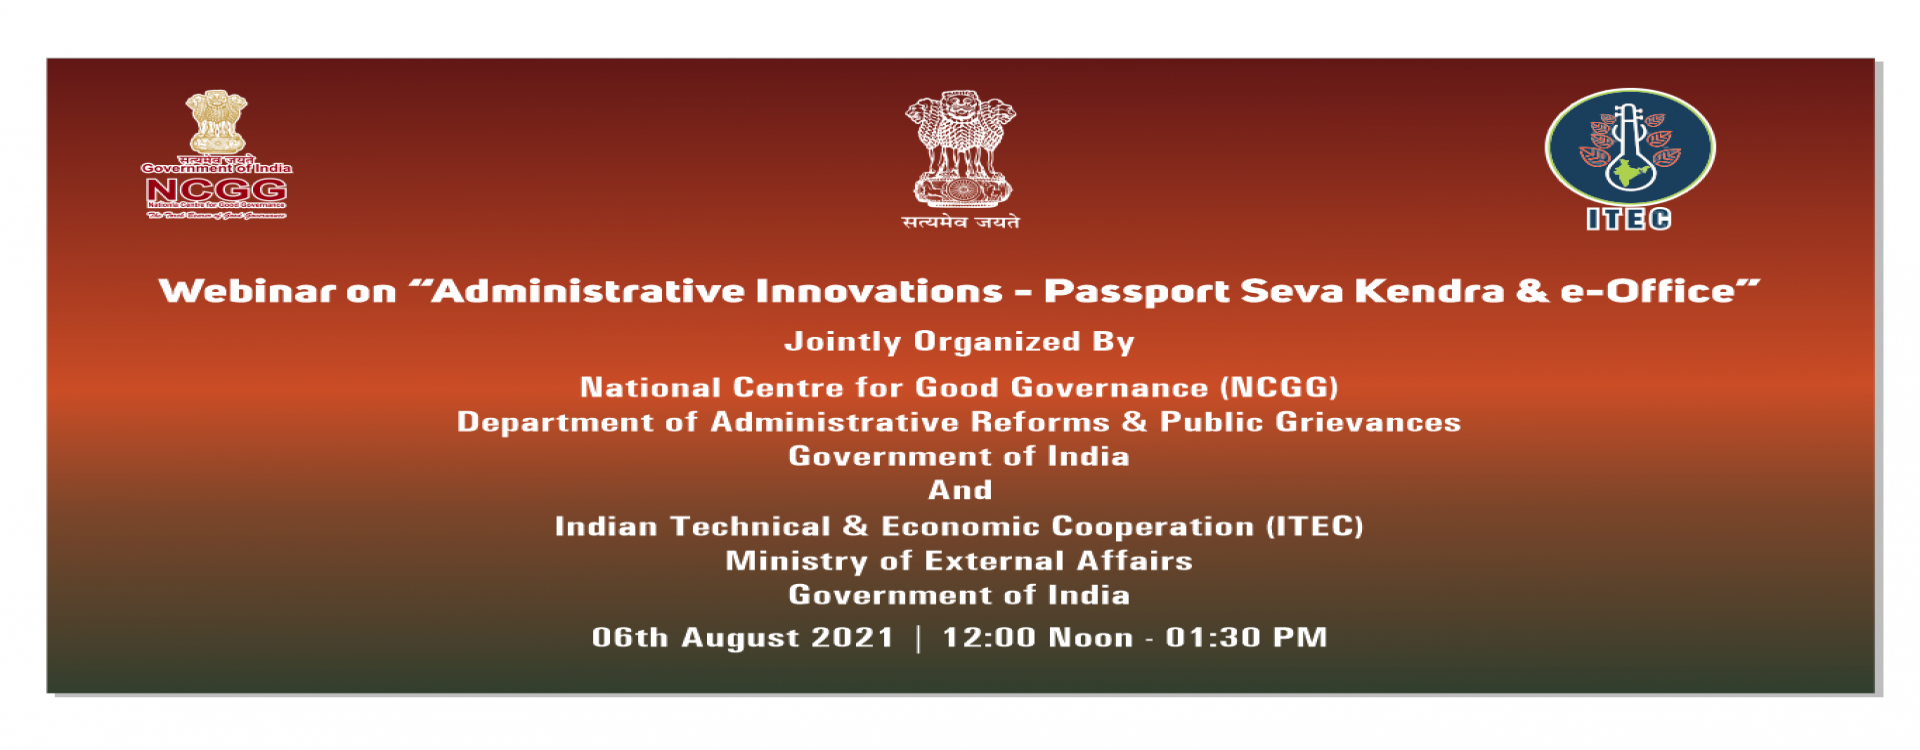 NCGG - ITEC Webinar on &quot;Administrative Innovations - Passport Seva Kendra &amp; e-Office on 06th August 2021 at 1200 hrs - 1330 hrs